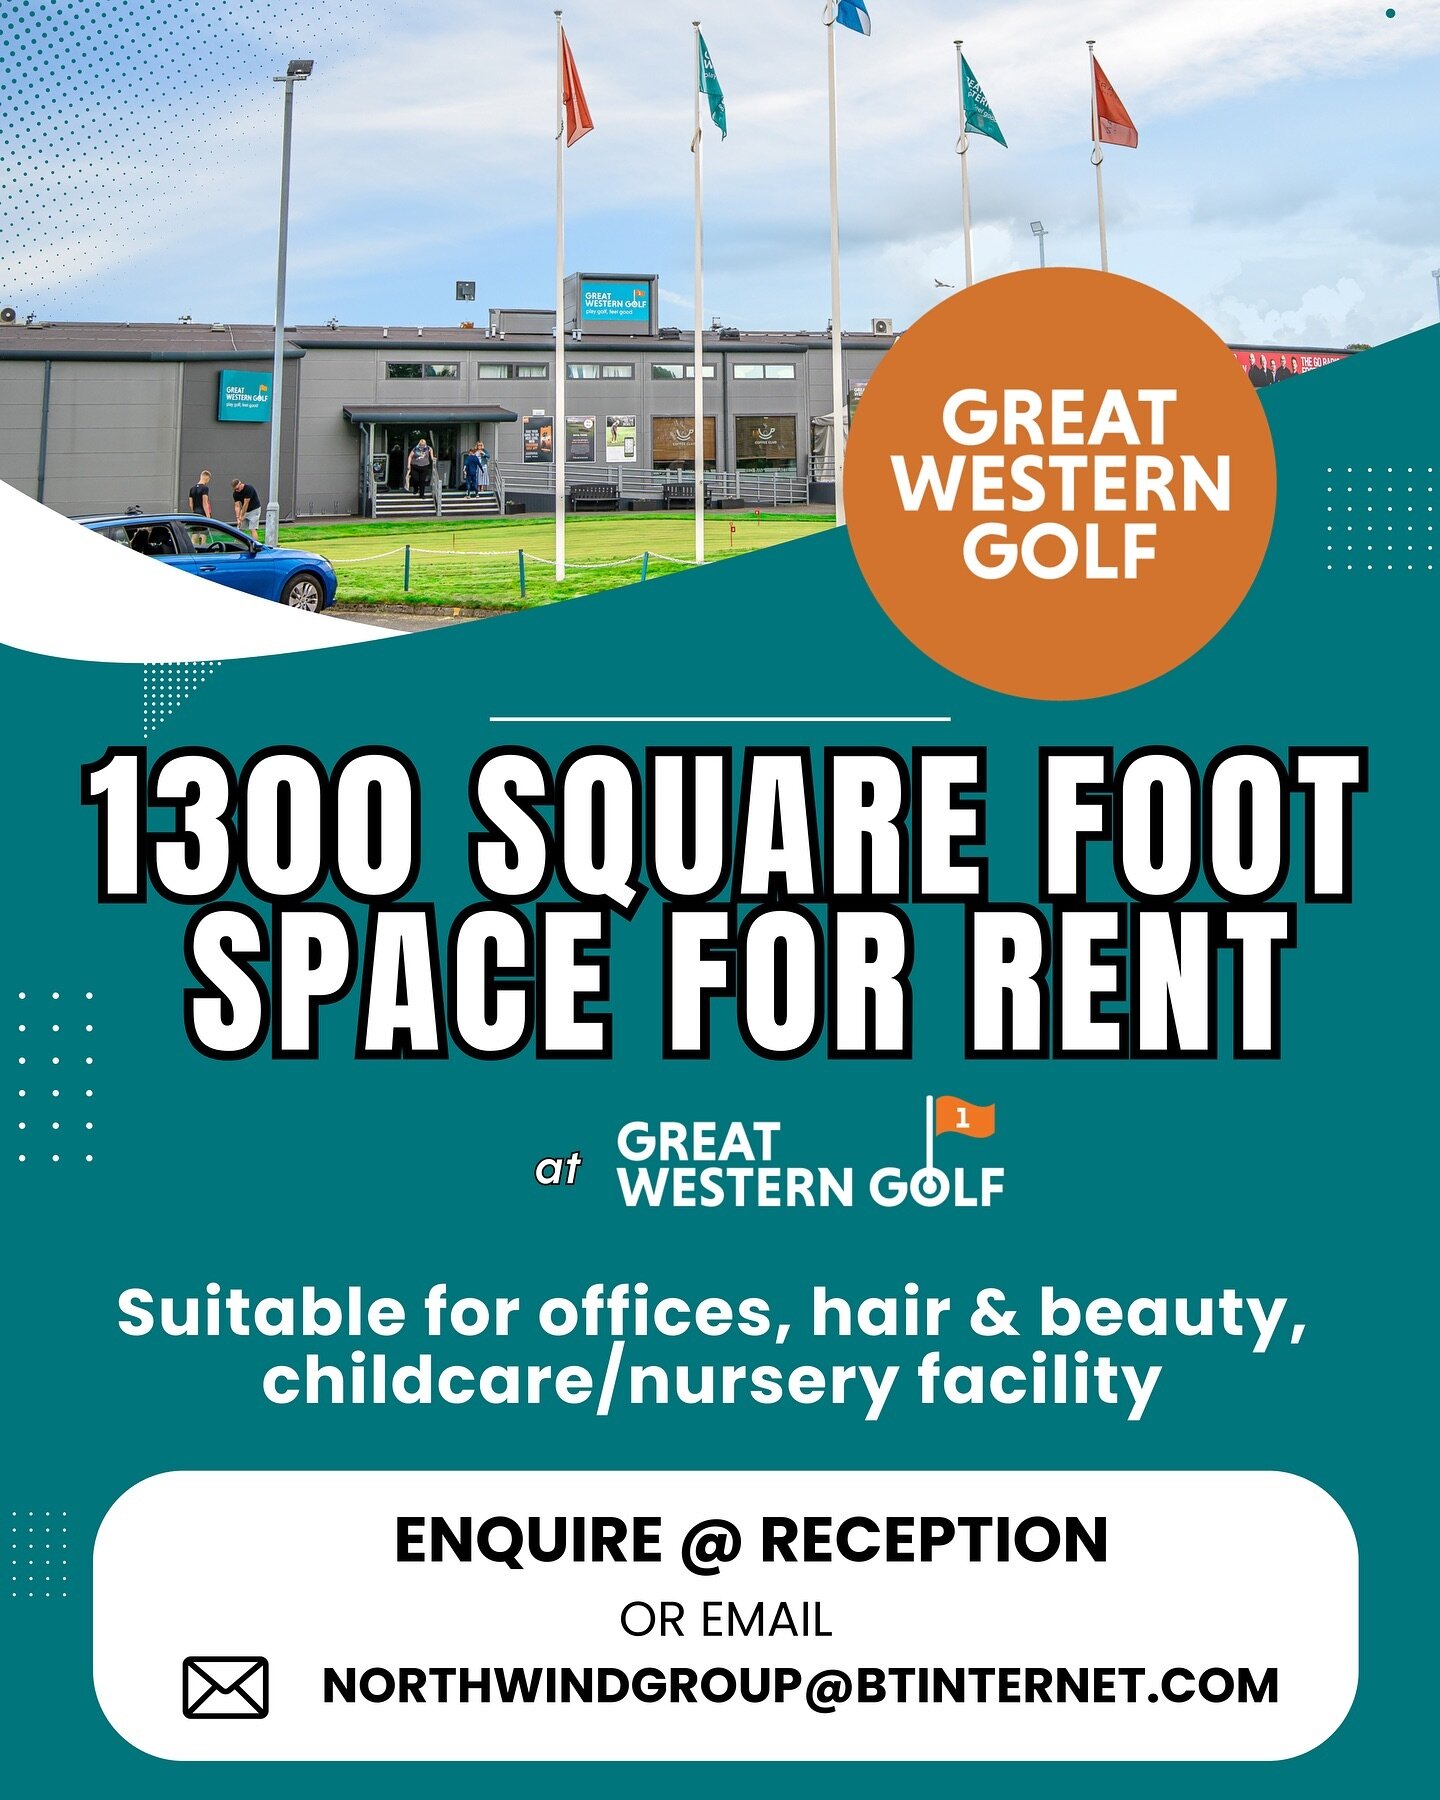 Space for rent in an excellent location. Able to accommodate a wide range of occupier requirements. Extensive parking on site. Passenger lift. Get in touch now for further information.